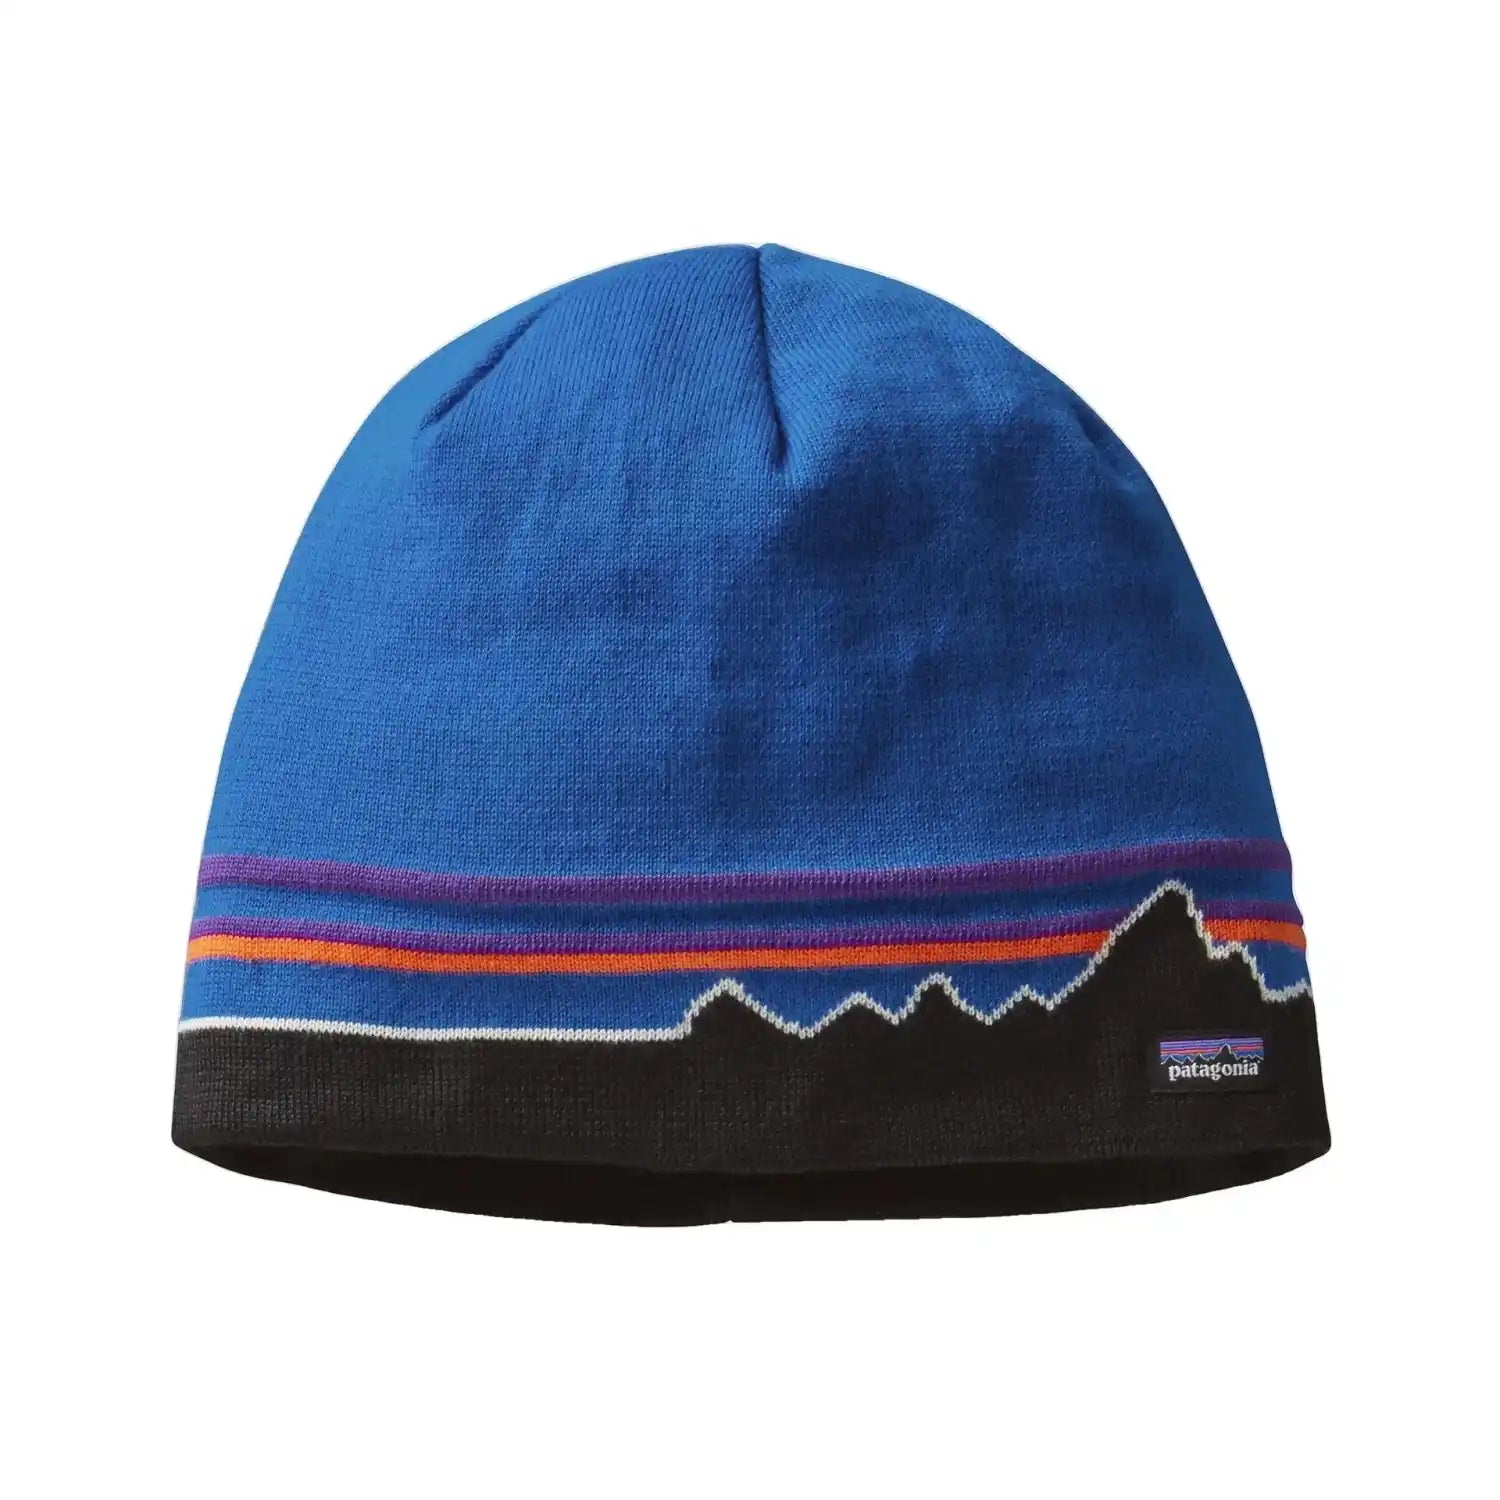 Patagonia Beanie Hat, Classic Fitz Roy Andes Blue, front view 